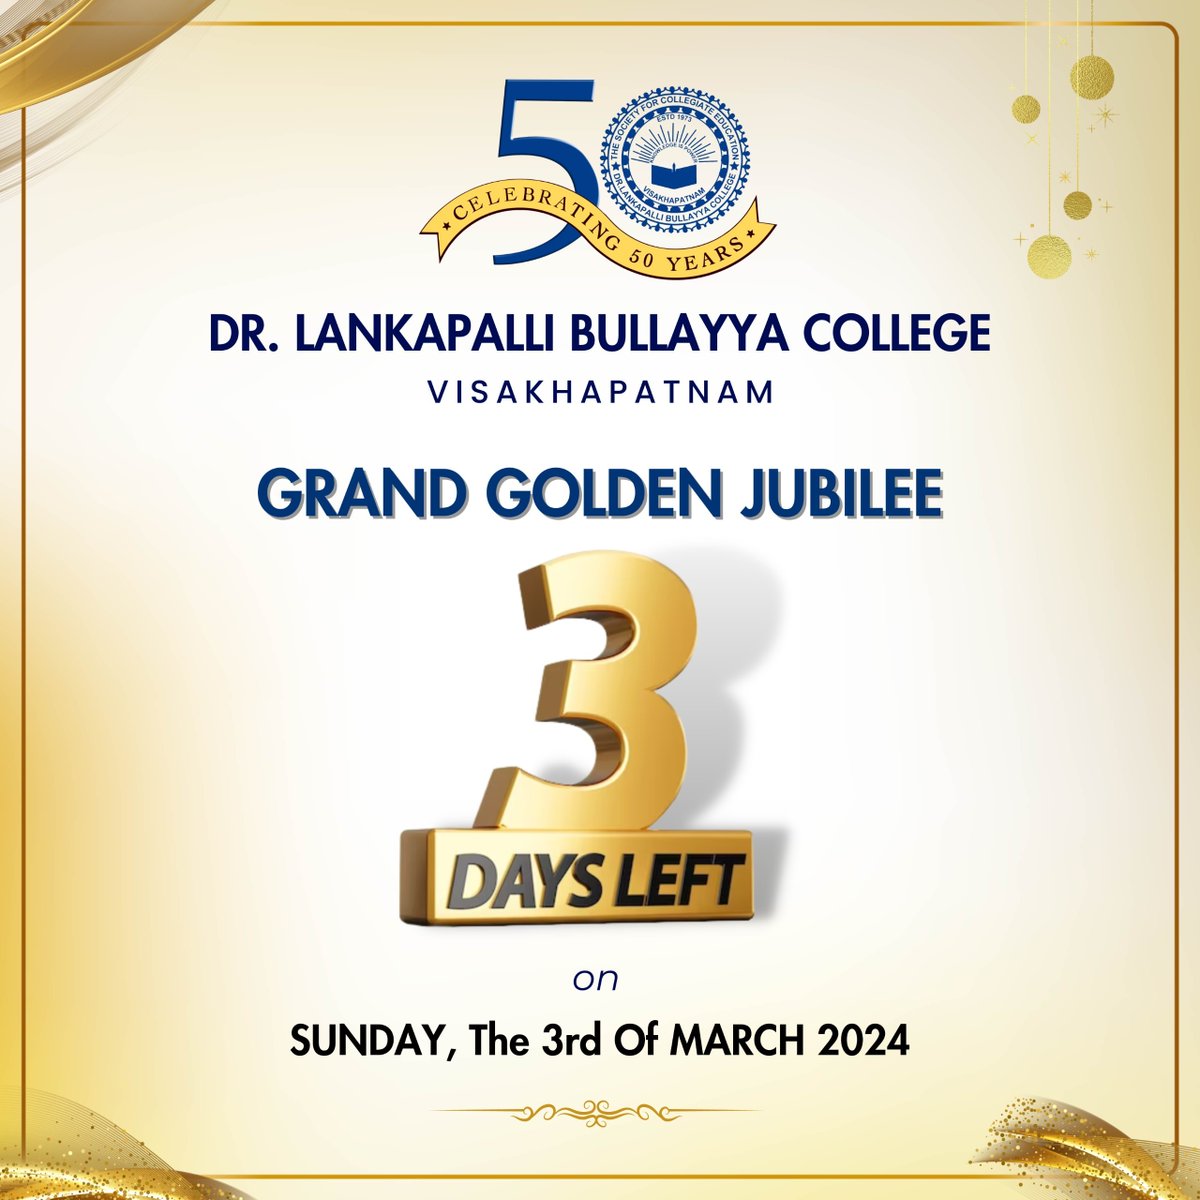 🎉 3 days to go! 🎉

The countdown has begun for the grand celebration of Dr. Lankapalli Bullayya College's 50th anniversary! Calling all esteemed alumni to be a part of the GRAND GOLDEN JUBILEE FINALE on Sunday, the 3rd of March 2024.

#LBC50Years #DrLBCollege #Celebrations